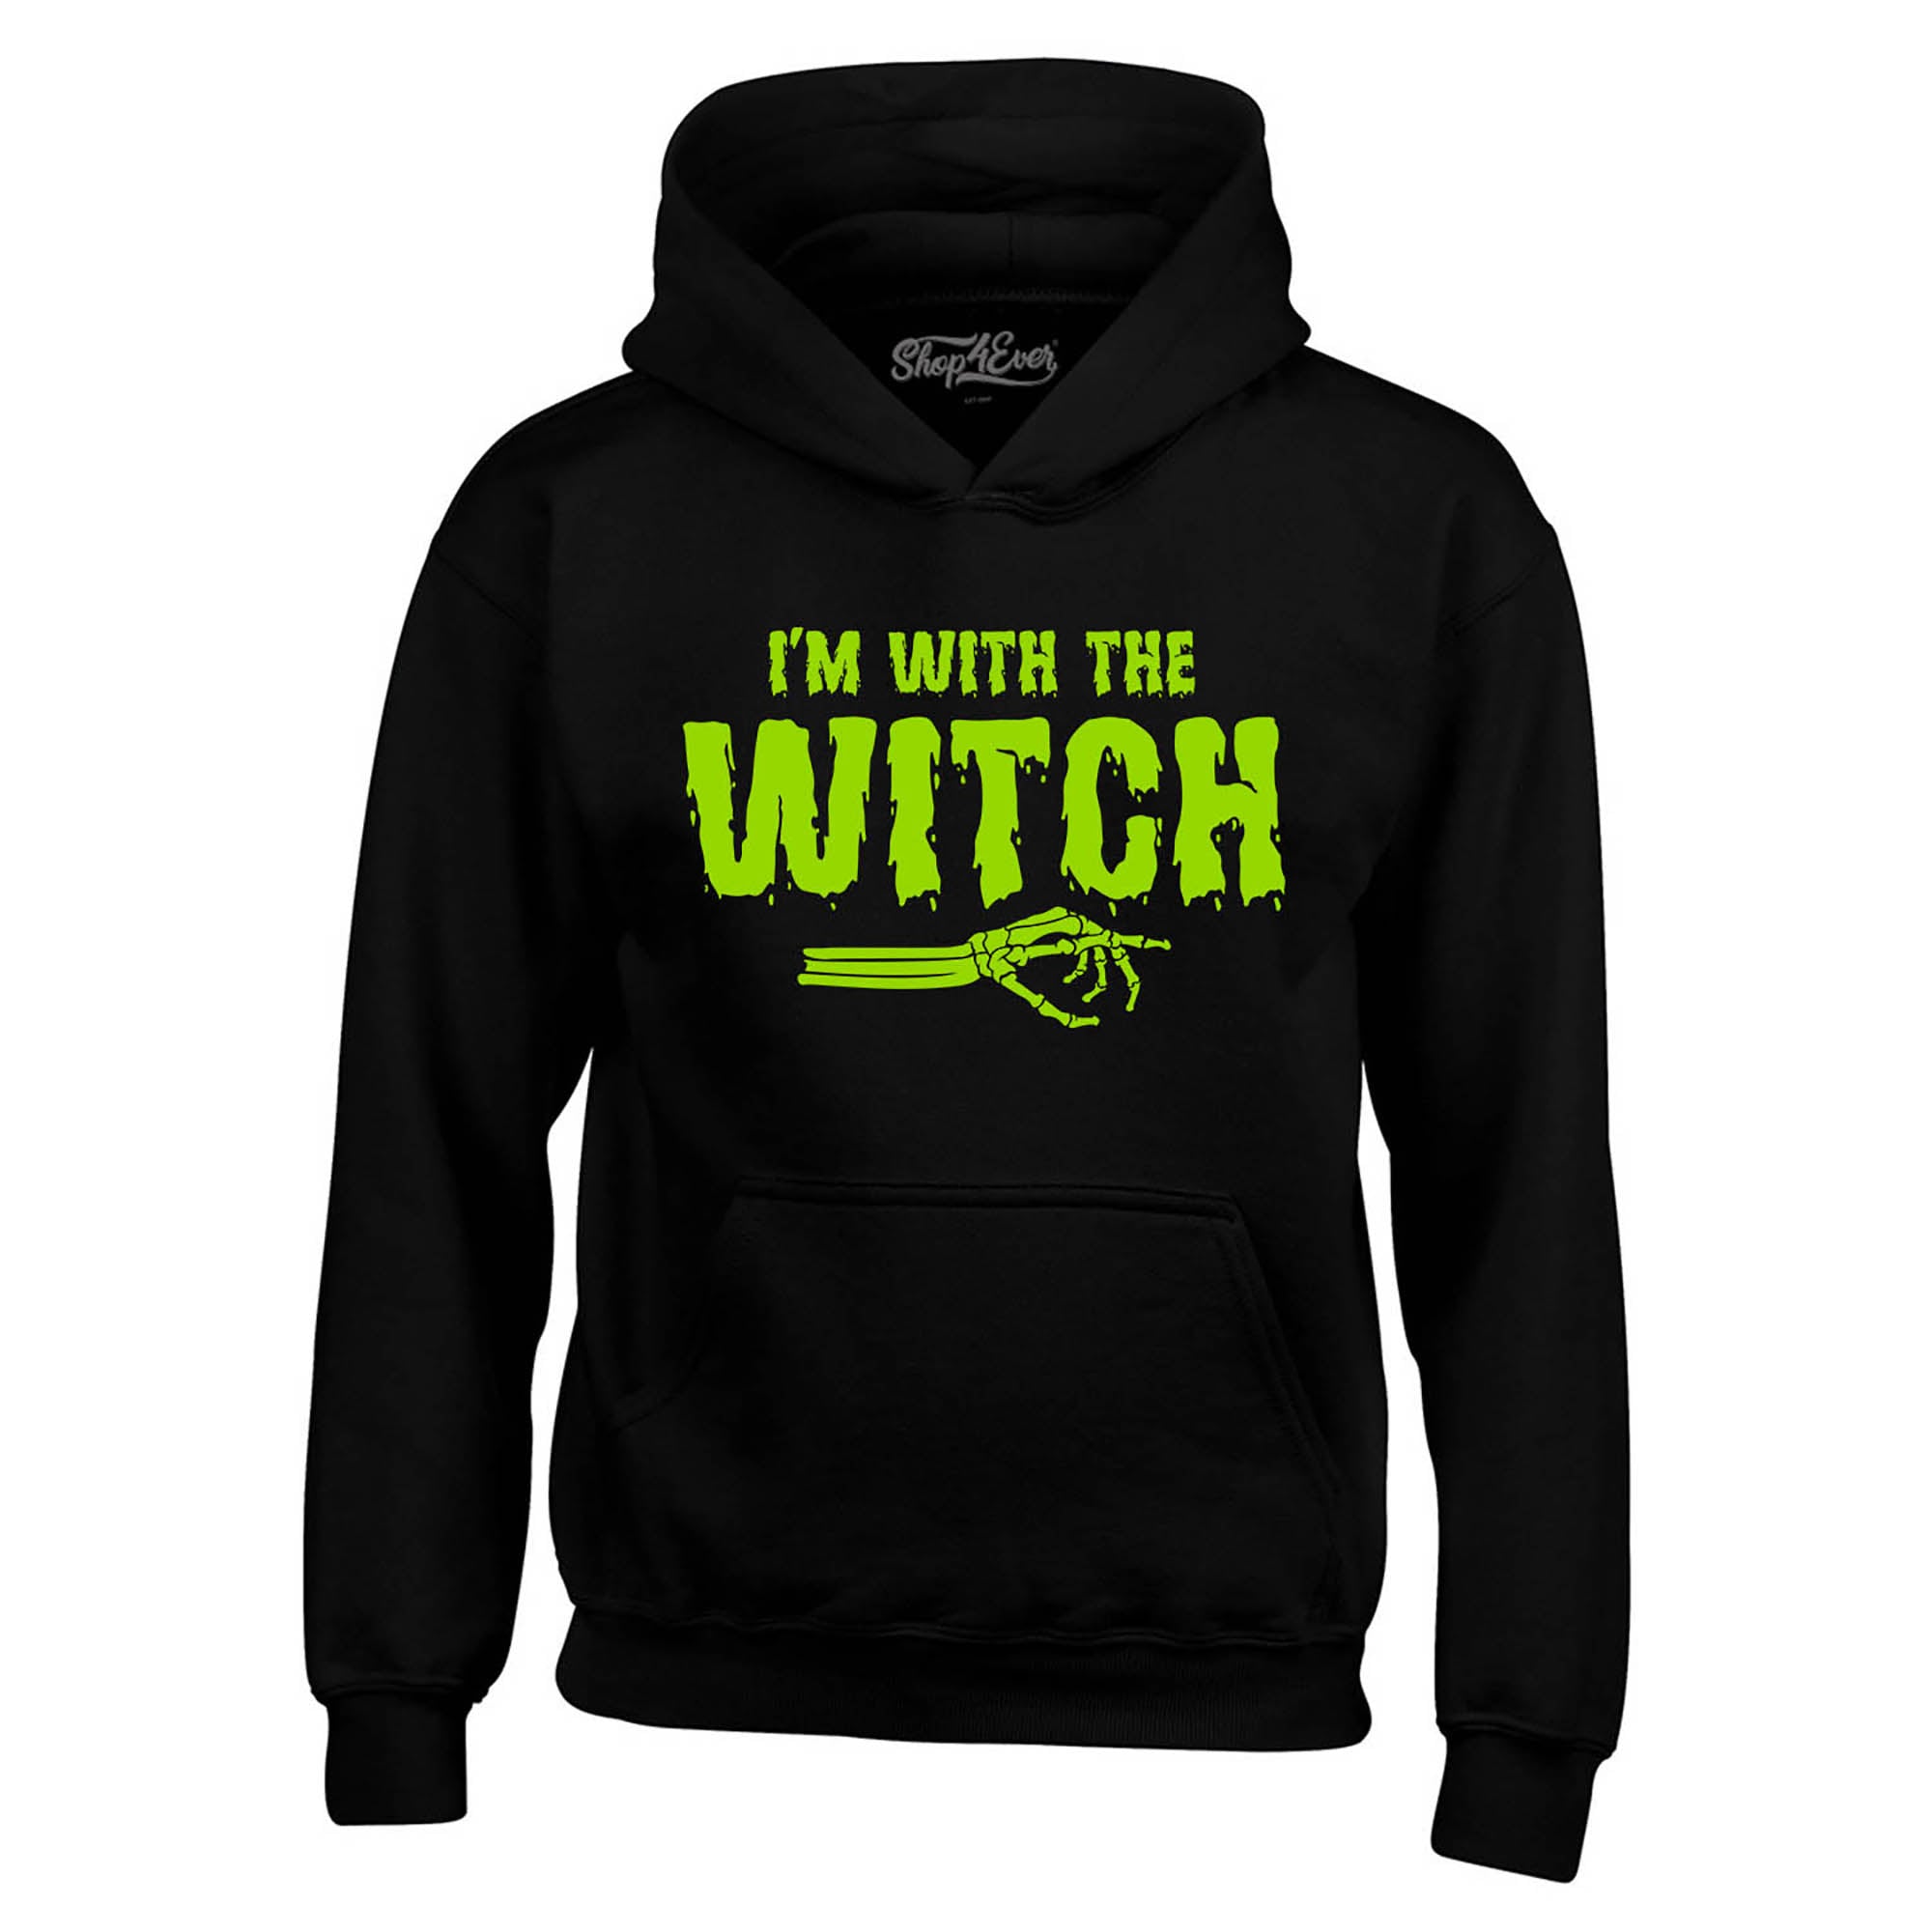 I'm With the Witch Funny Easy Halloween Costume Hoodie Sweatshirts